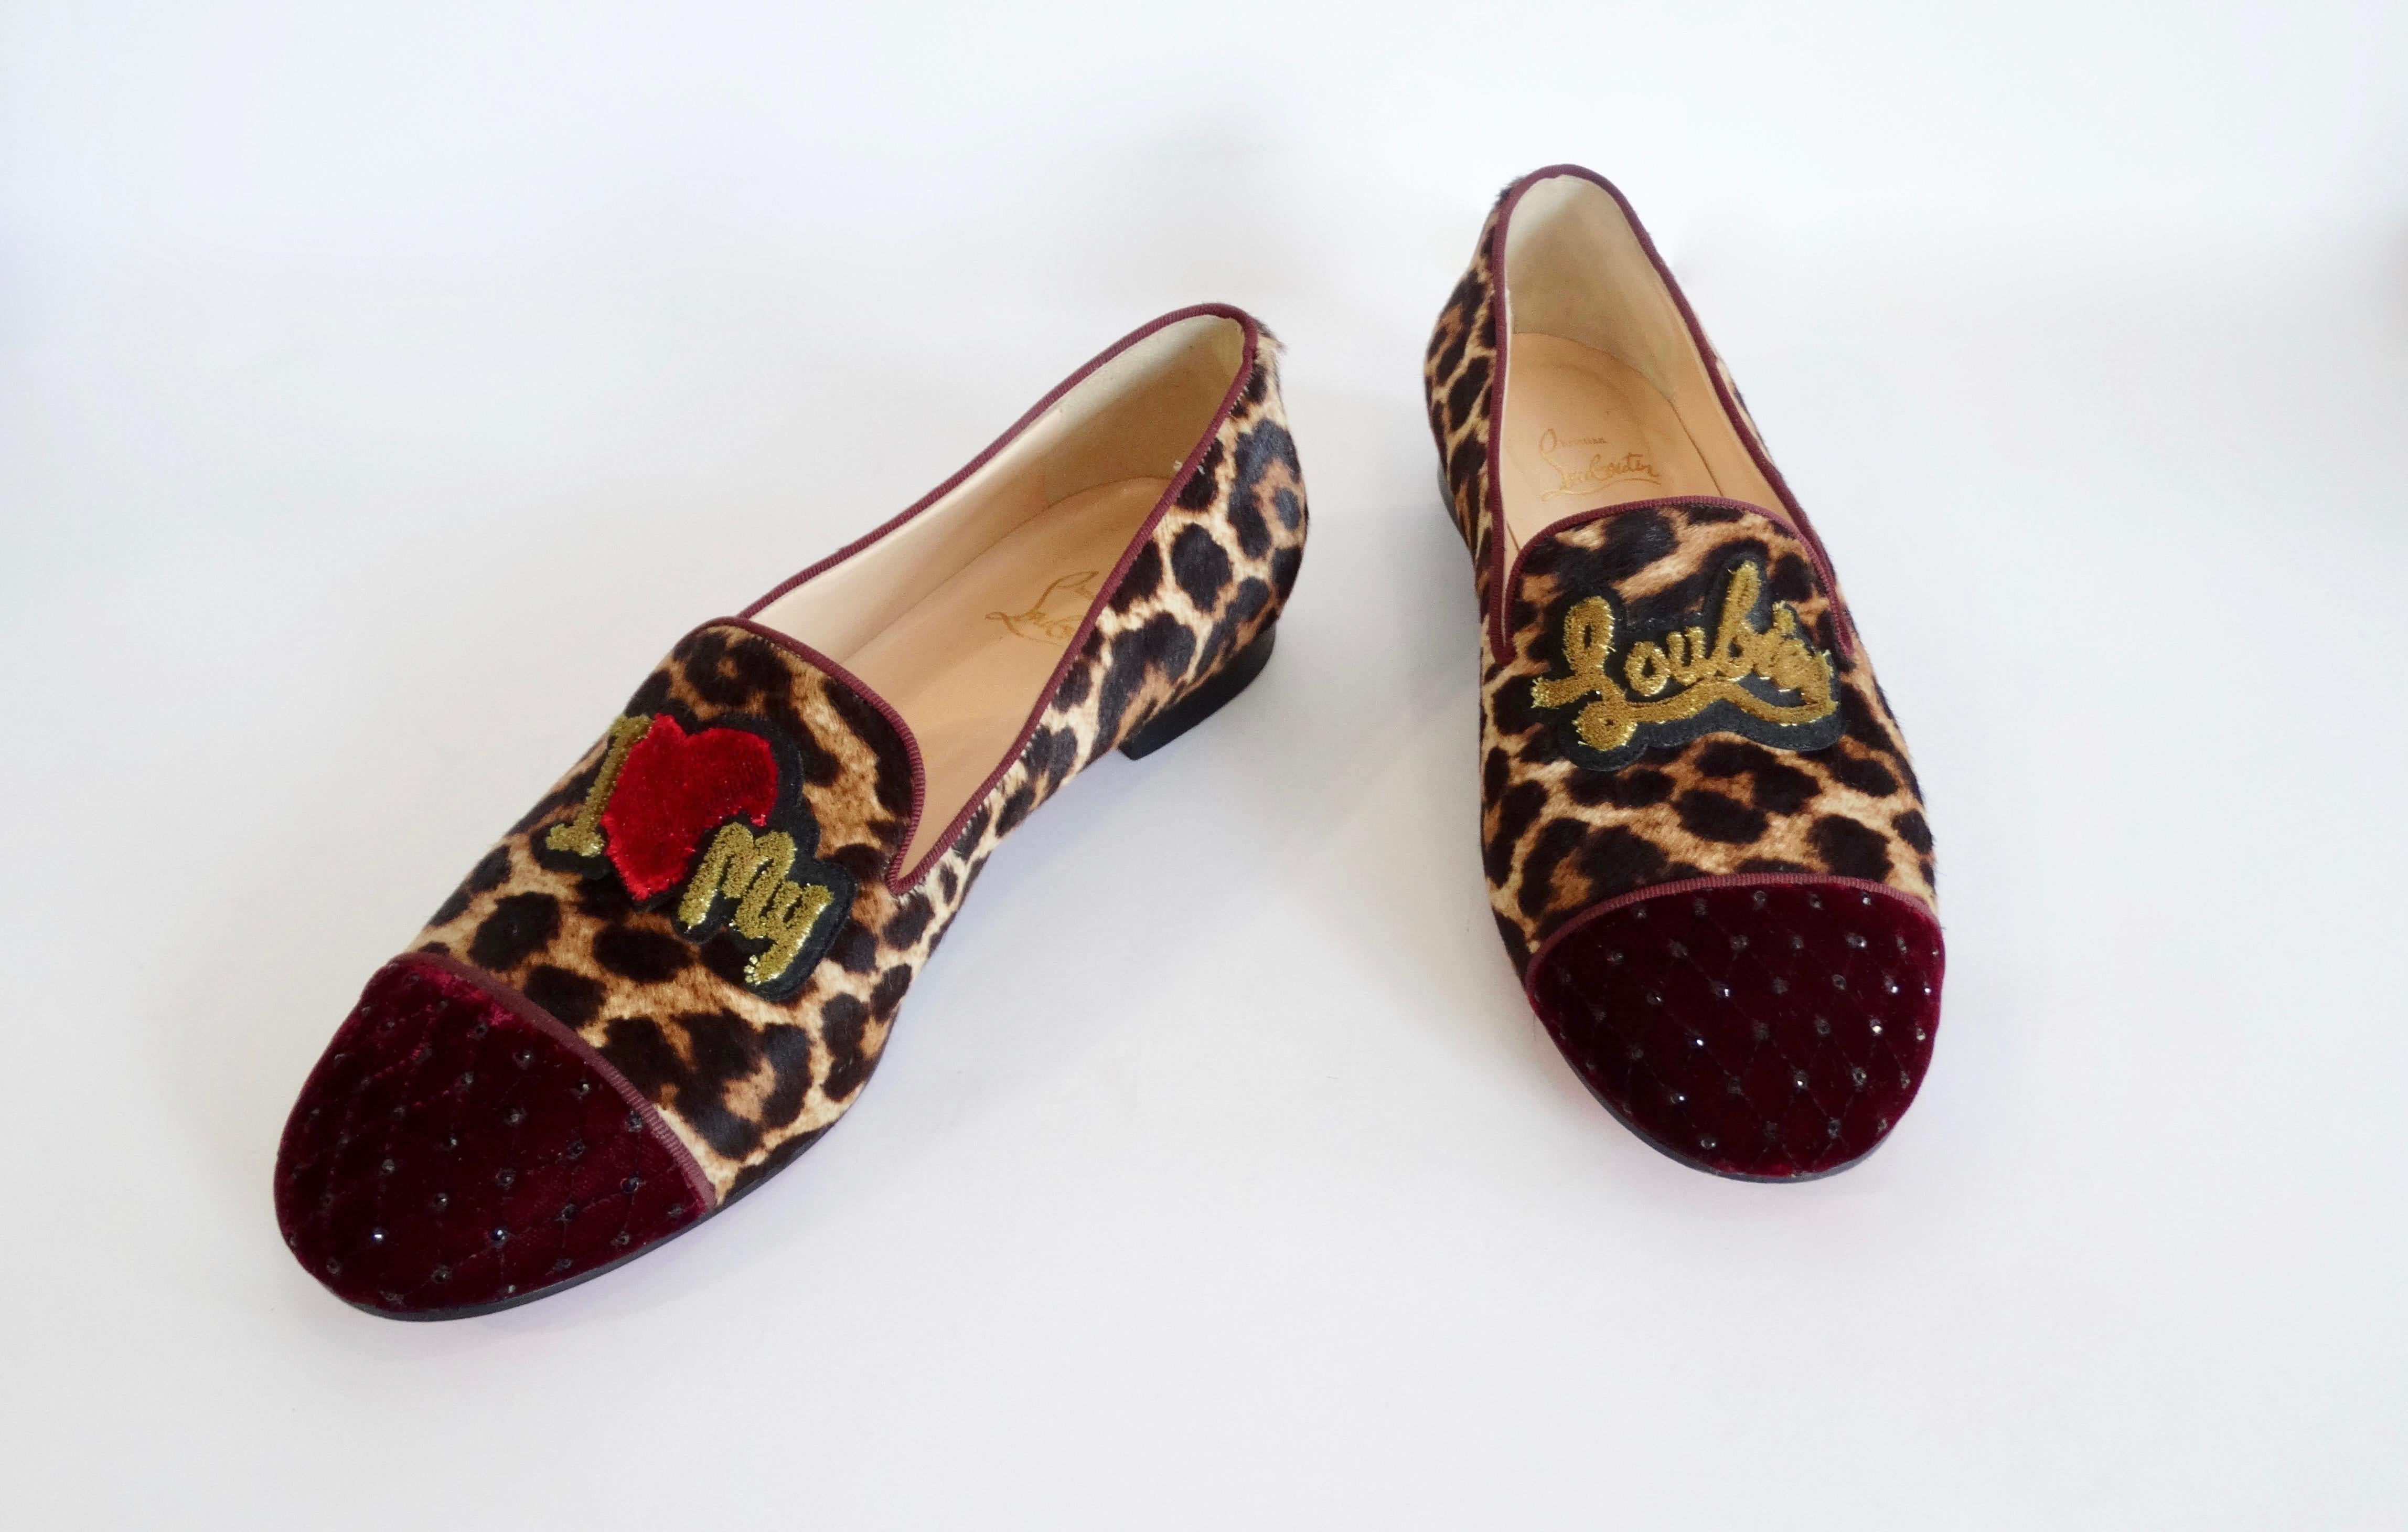 Flash those red bottoms girl! Circa recent 2000s, these Louboutin loafers features leopard print calfskin and a velvet burgundy quilted cap-toe with crystals. Included on the front is 